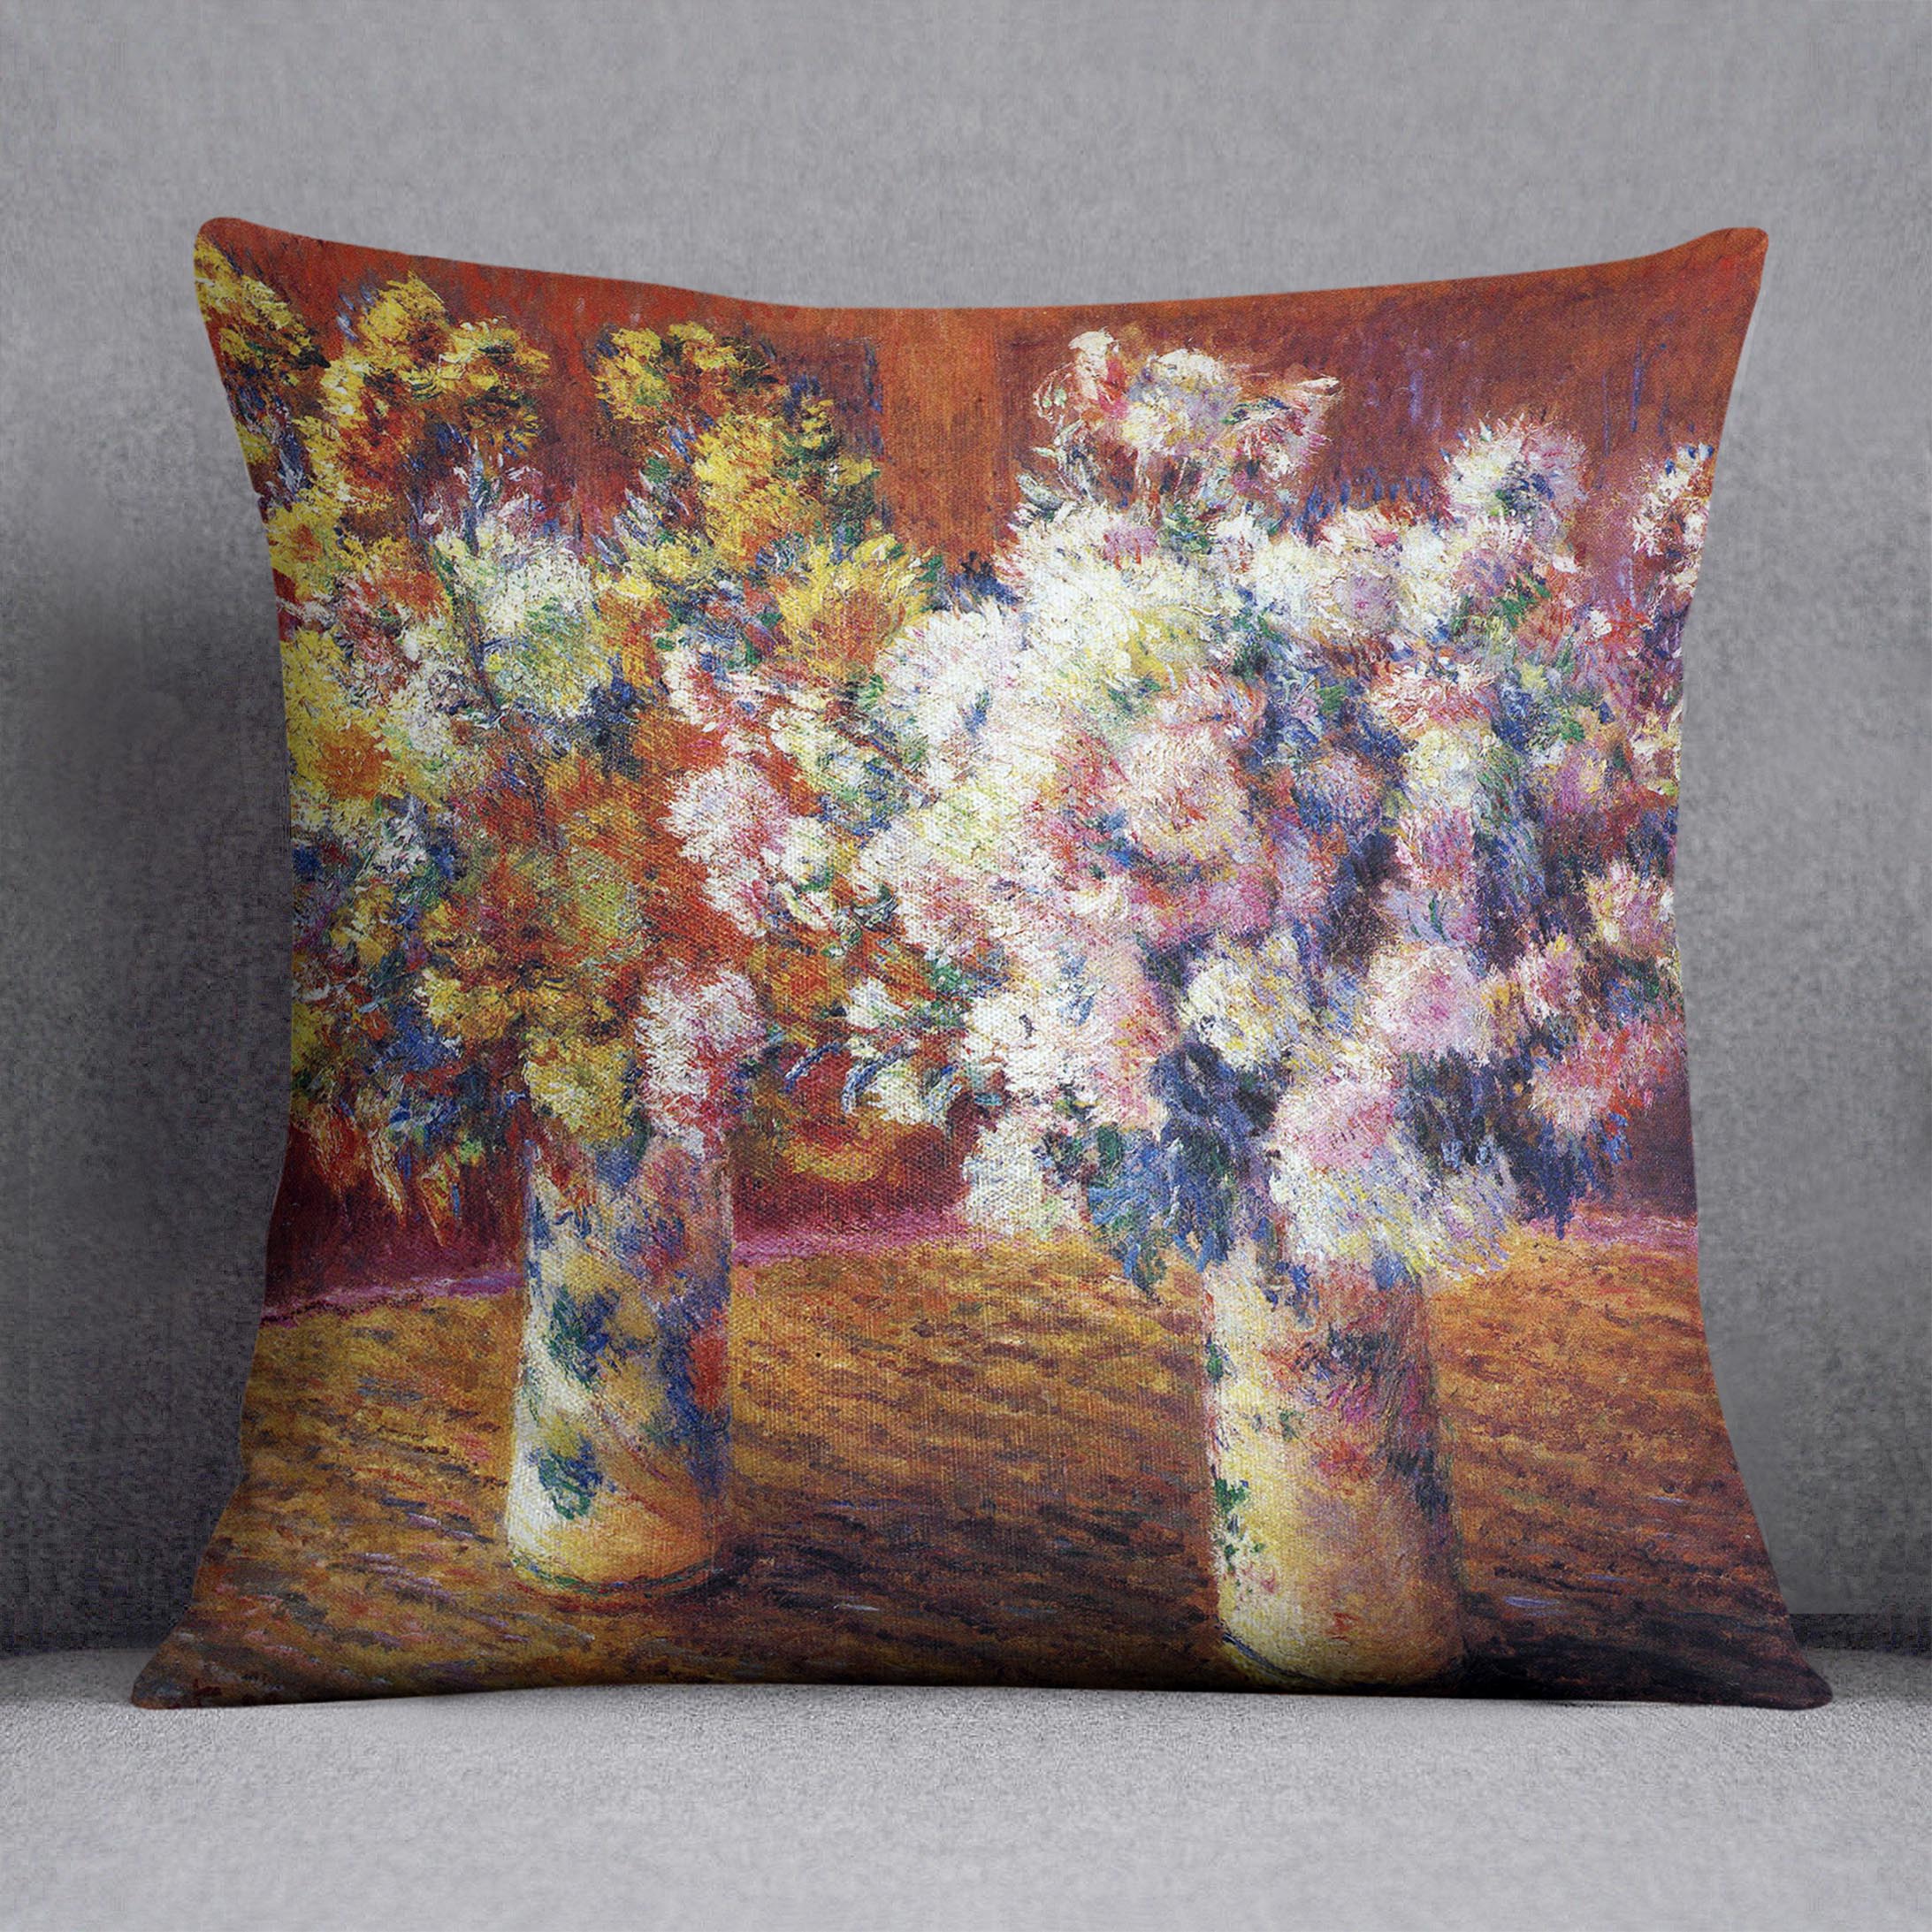 Two vases with Chrysanthemums by Monet Cushion